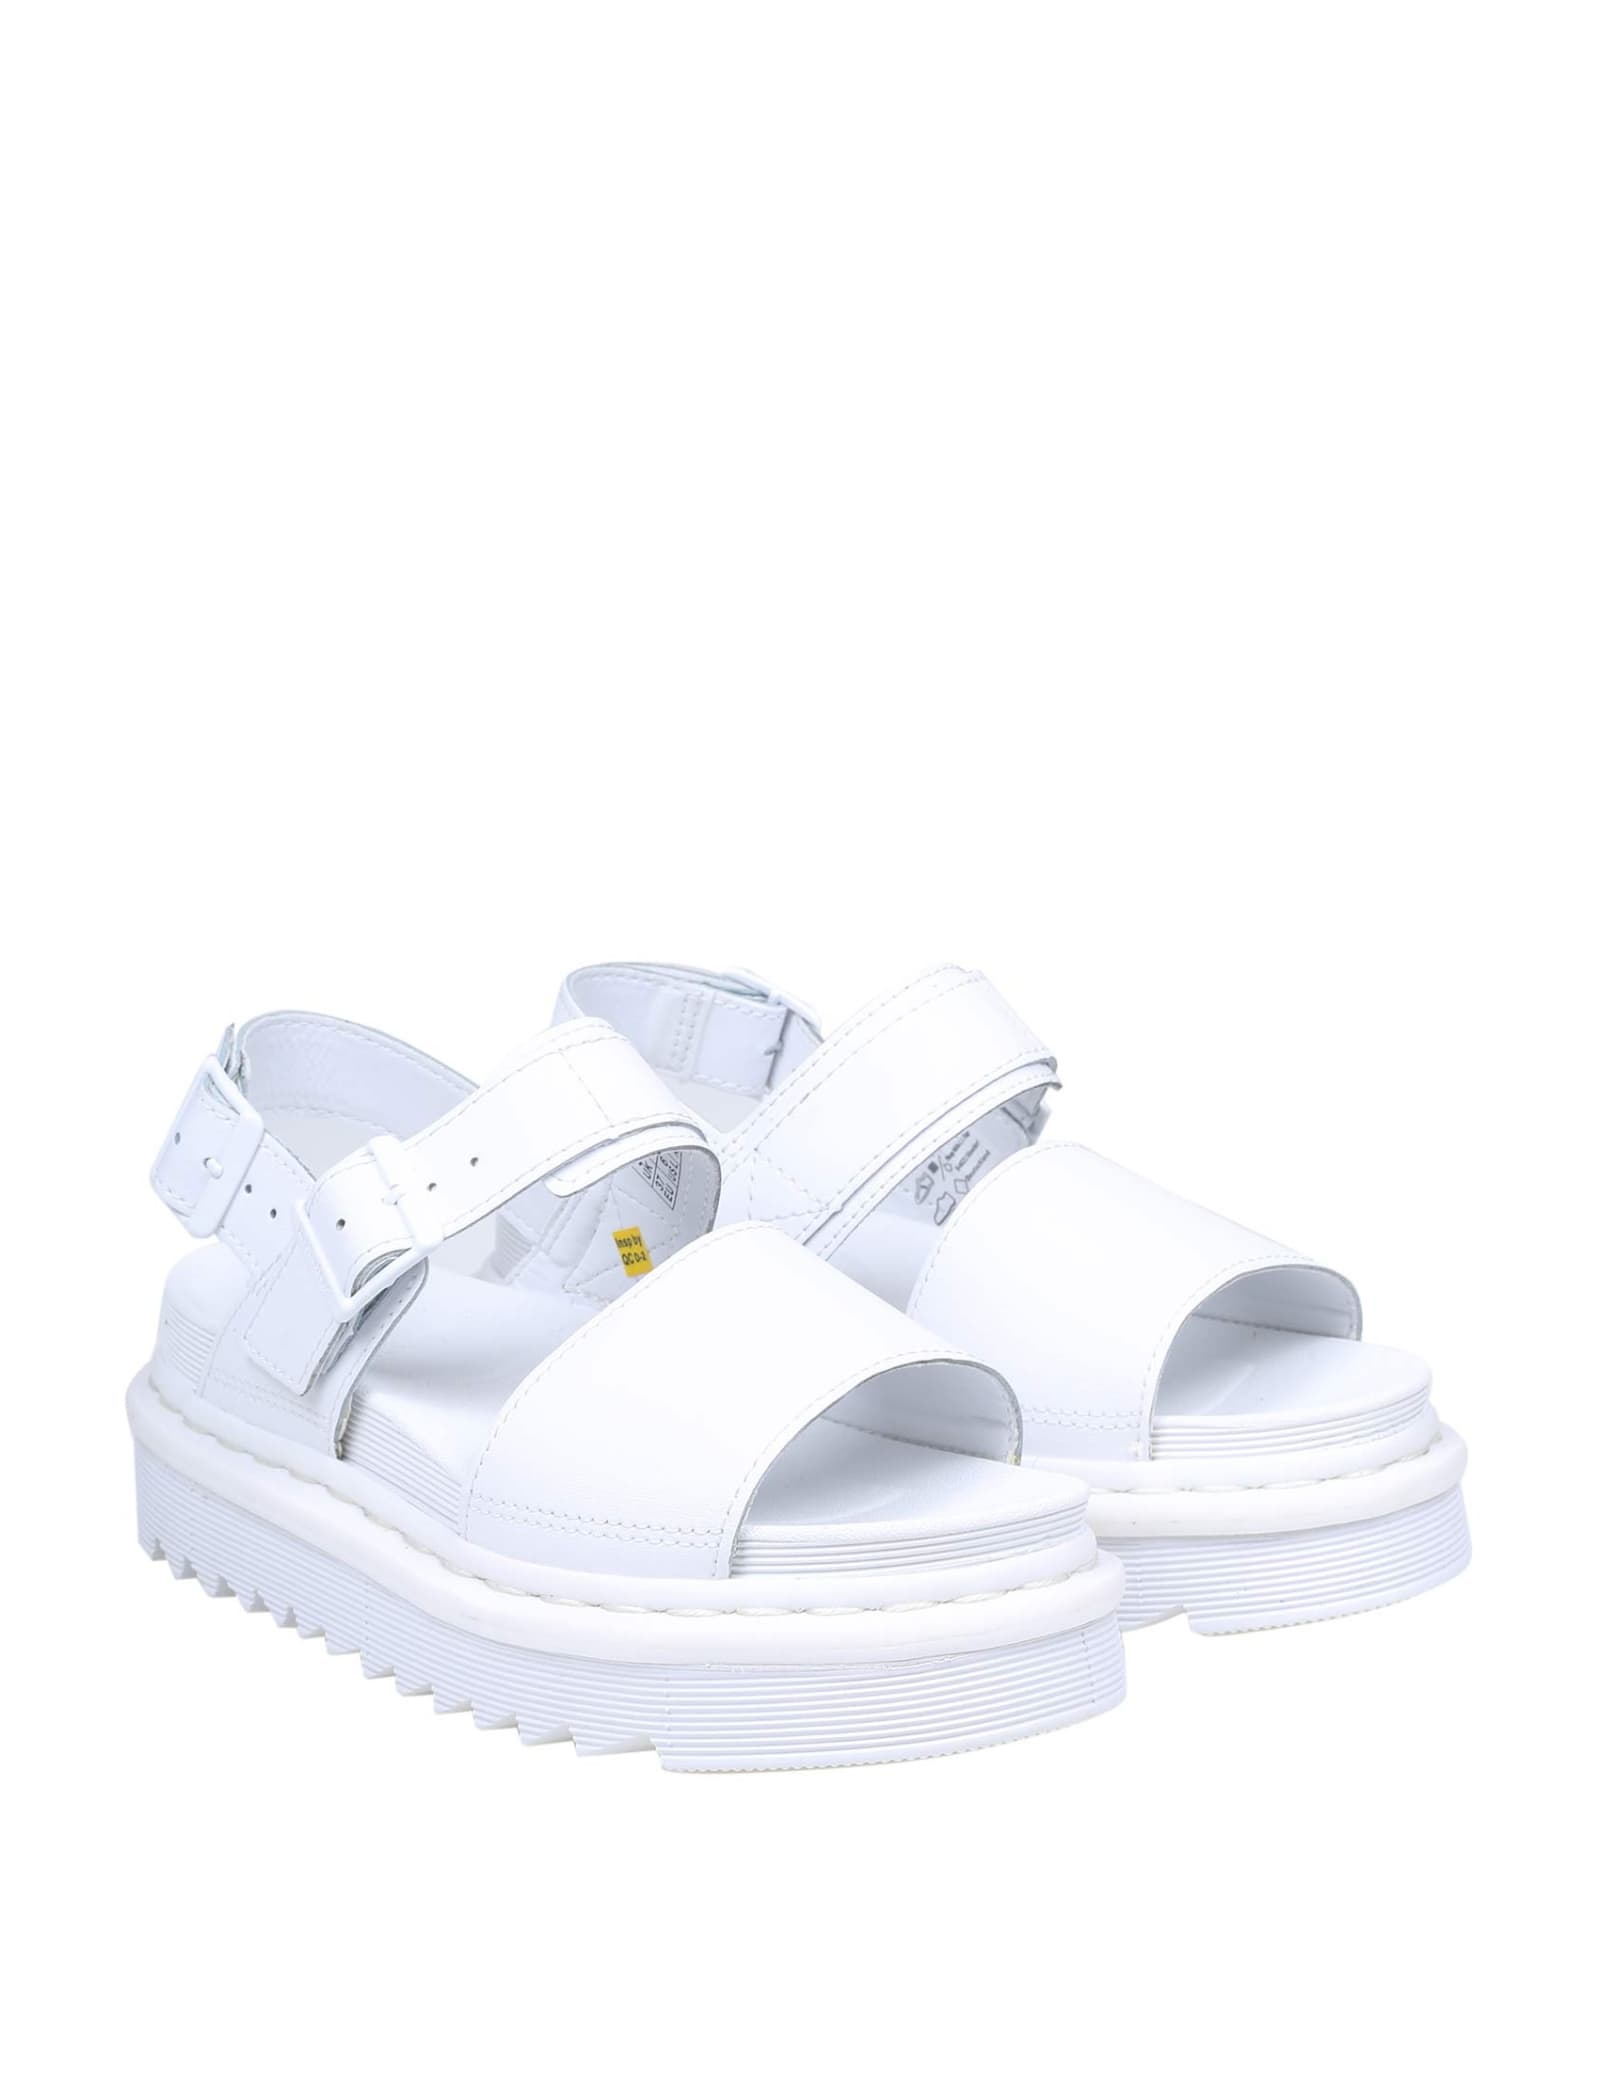 Dr.martens Voss Sandal In White Leather